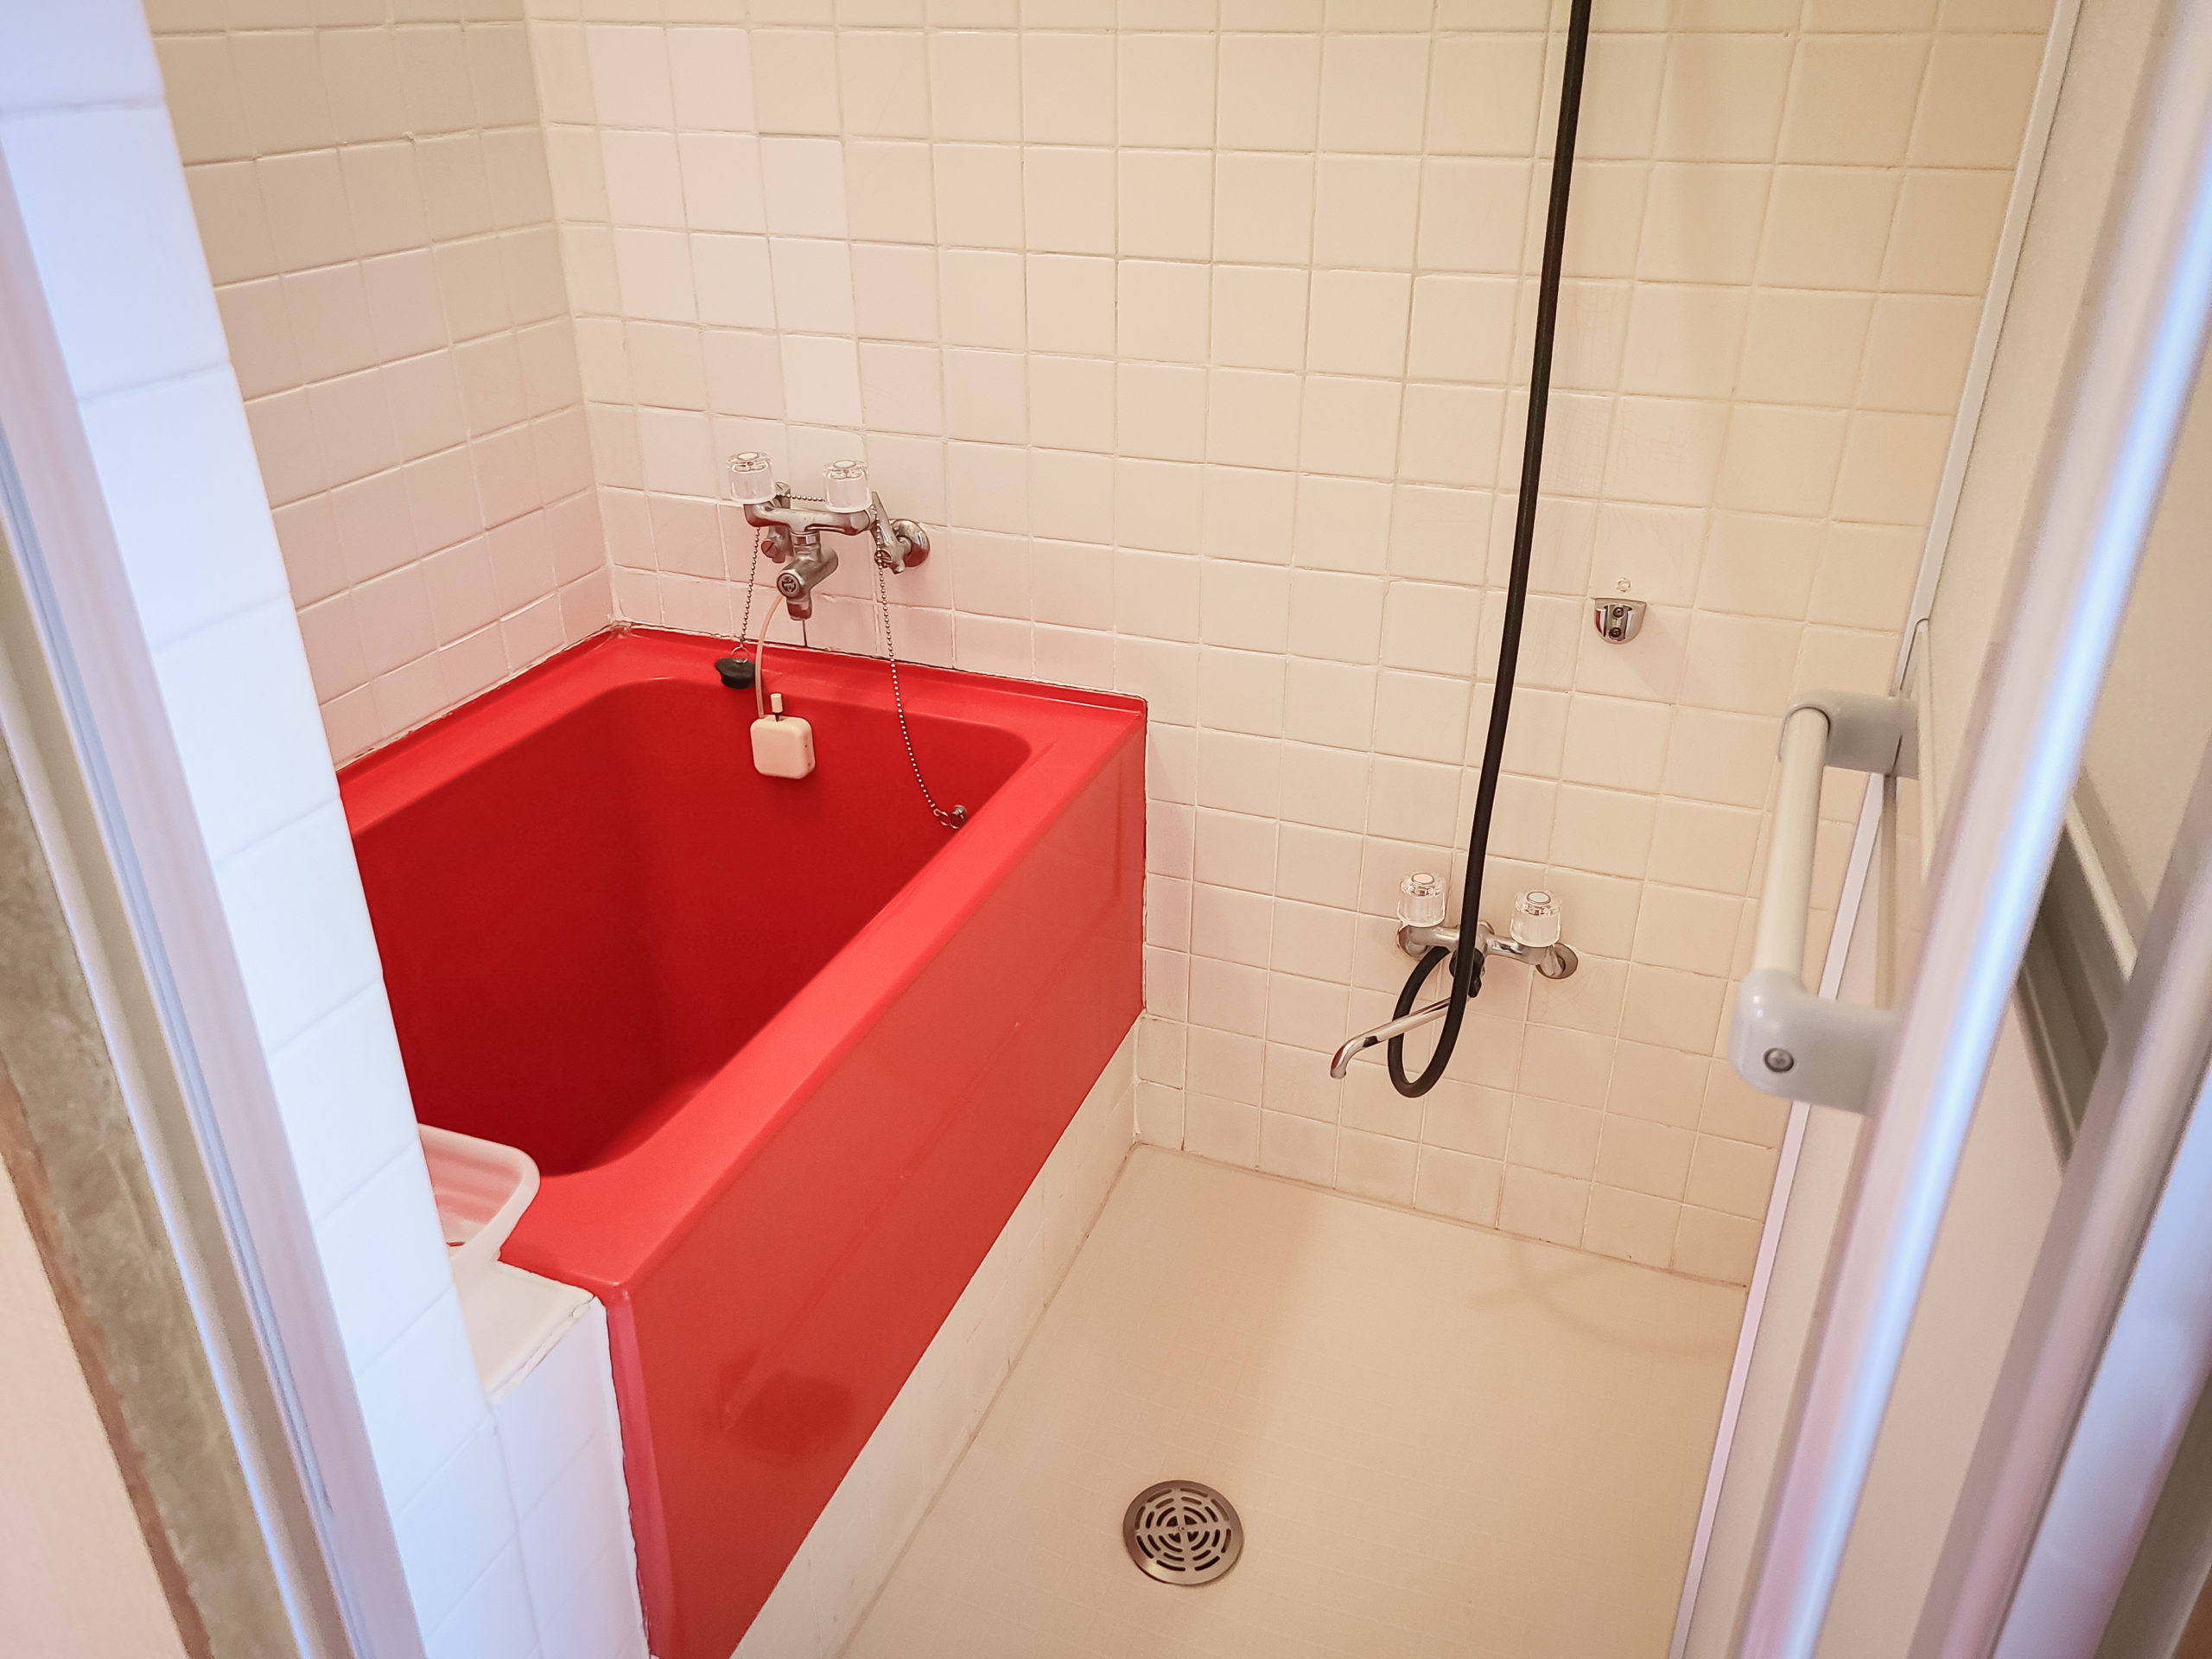 The color of the bathtub varies from room to room